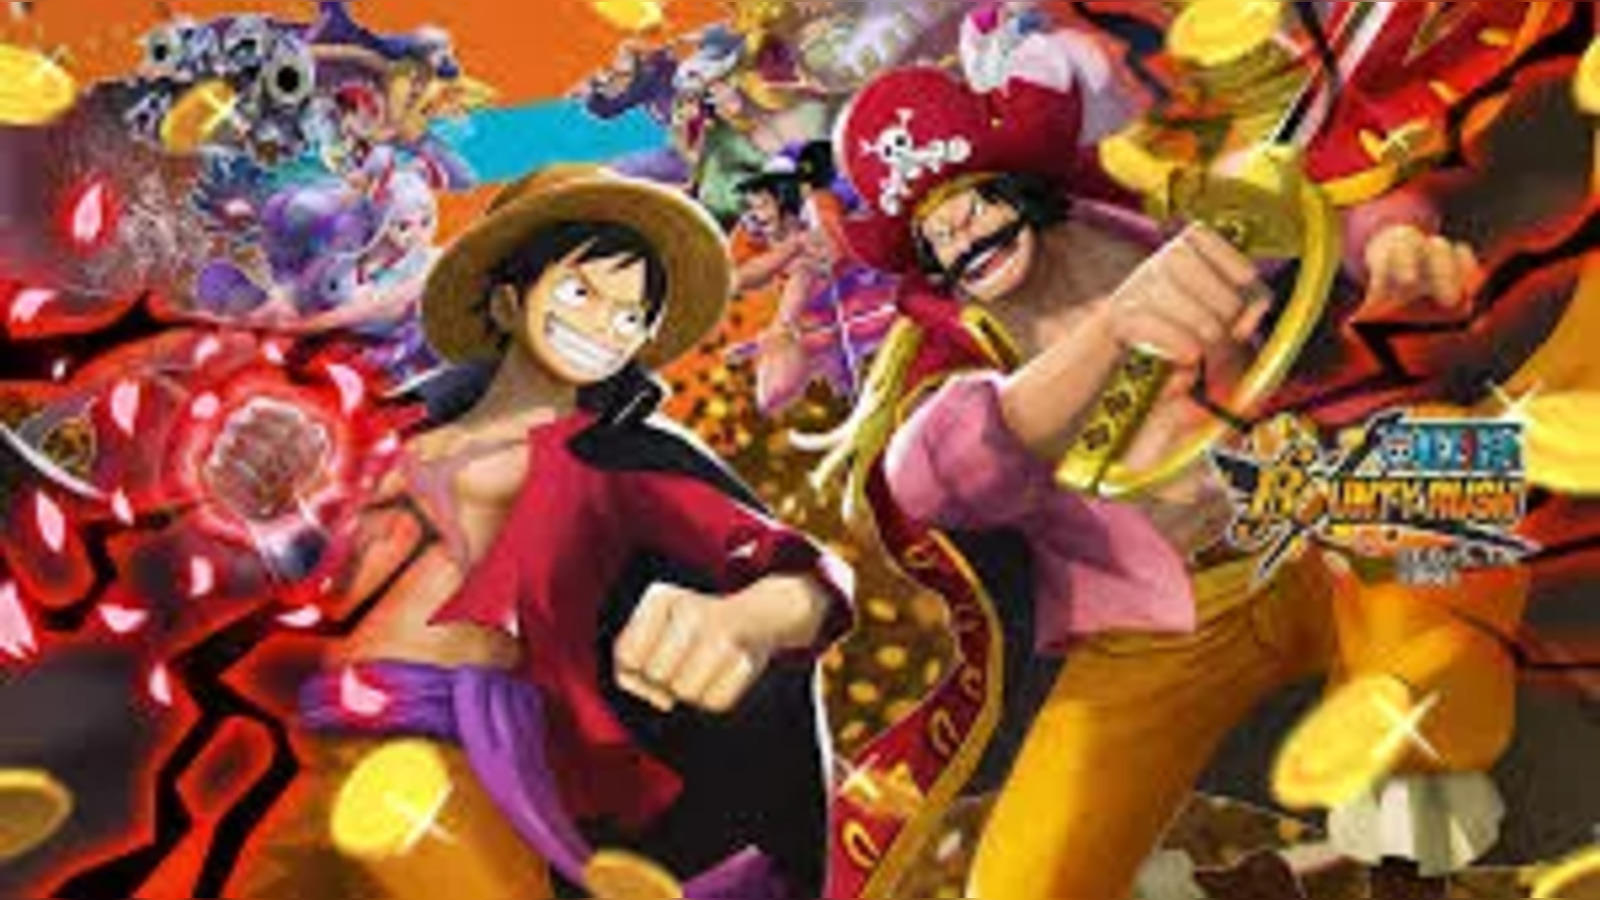 One Piece Episode 1087: One Piece Episode 1087 set to unveil post-Wano  world: Release date, spoilers and what to expect - The Economic Times